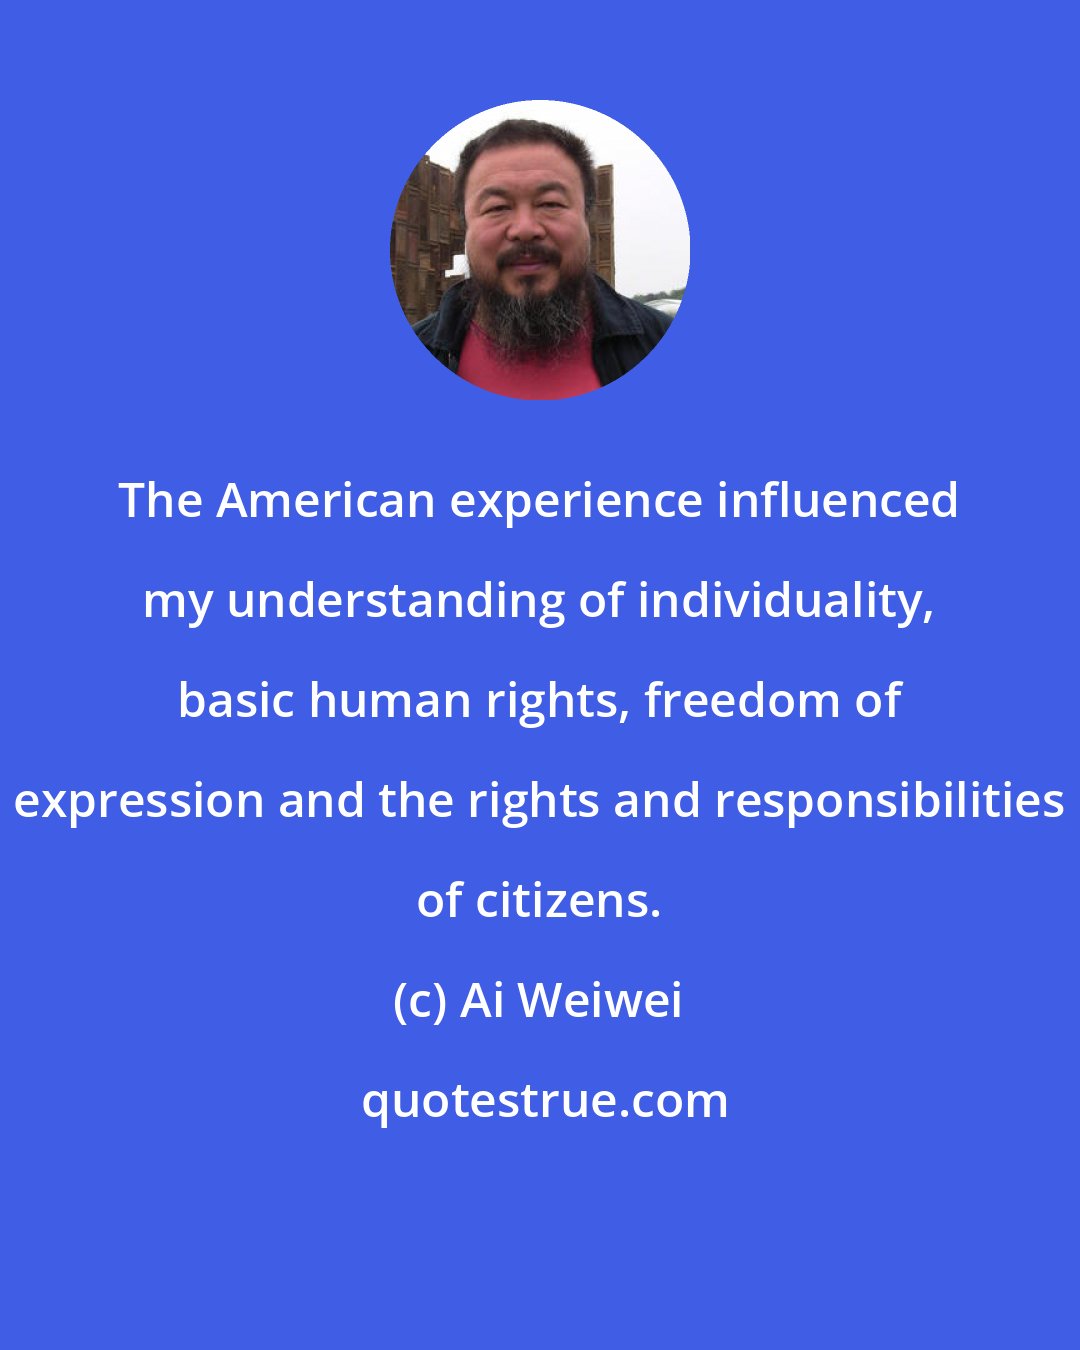 Ai Weiwei: The American experience influenced my understanding of individuality, basic human rights, freedom of expression and the rights and responsibilities of citizens.